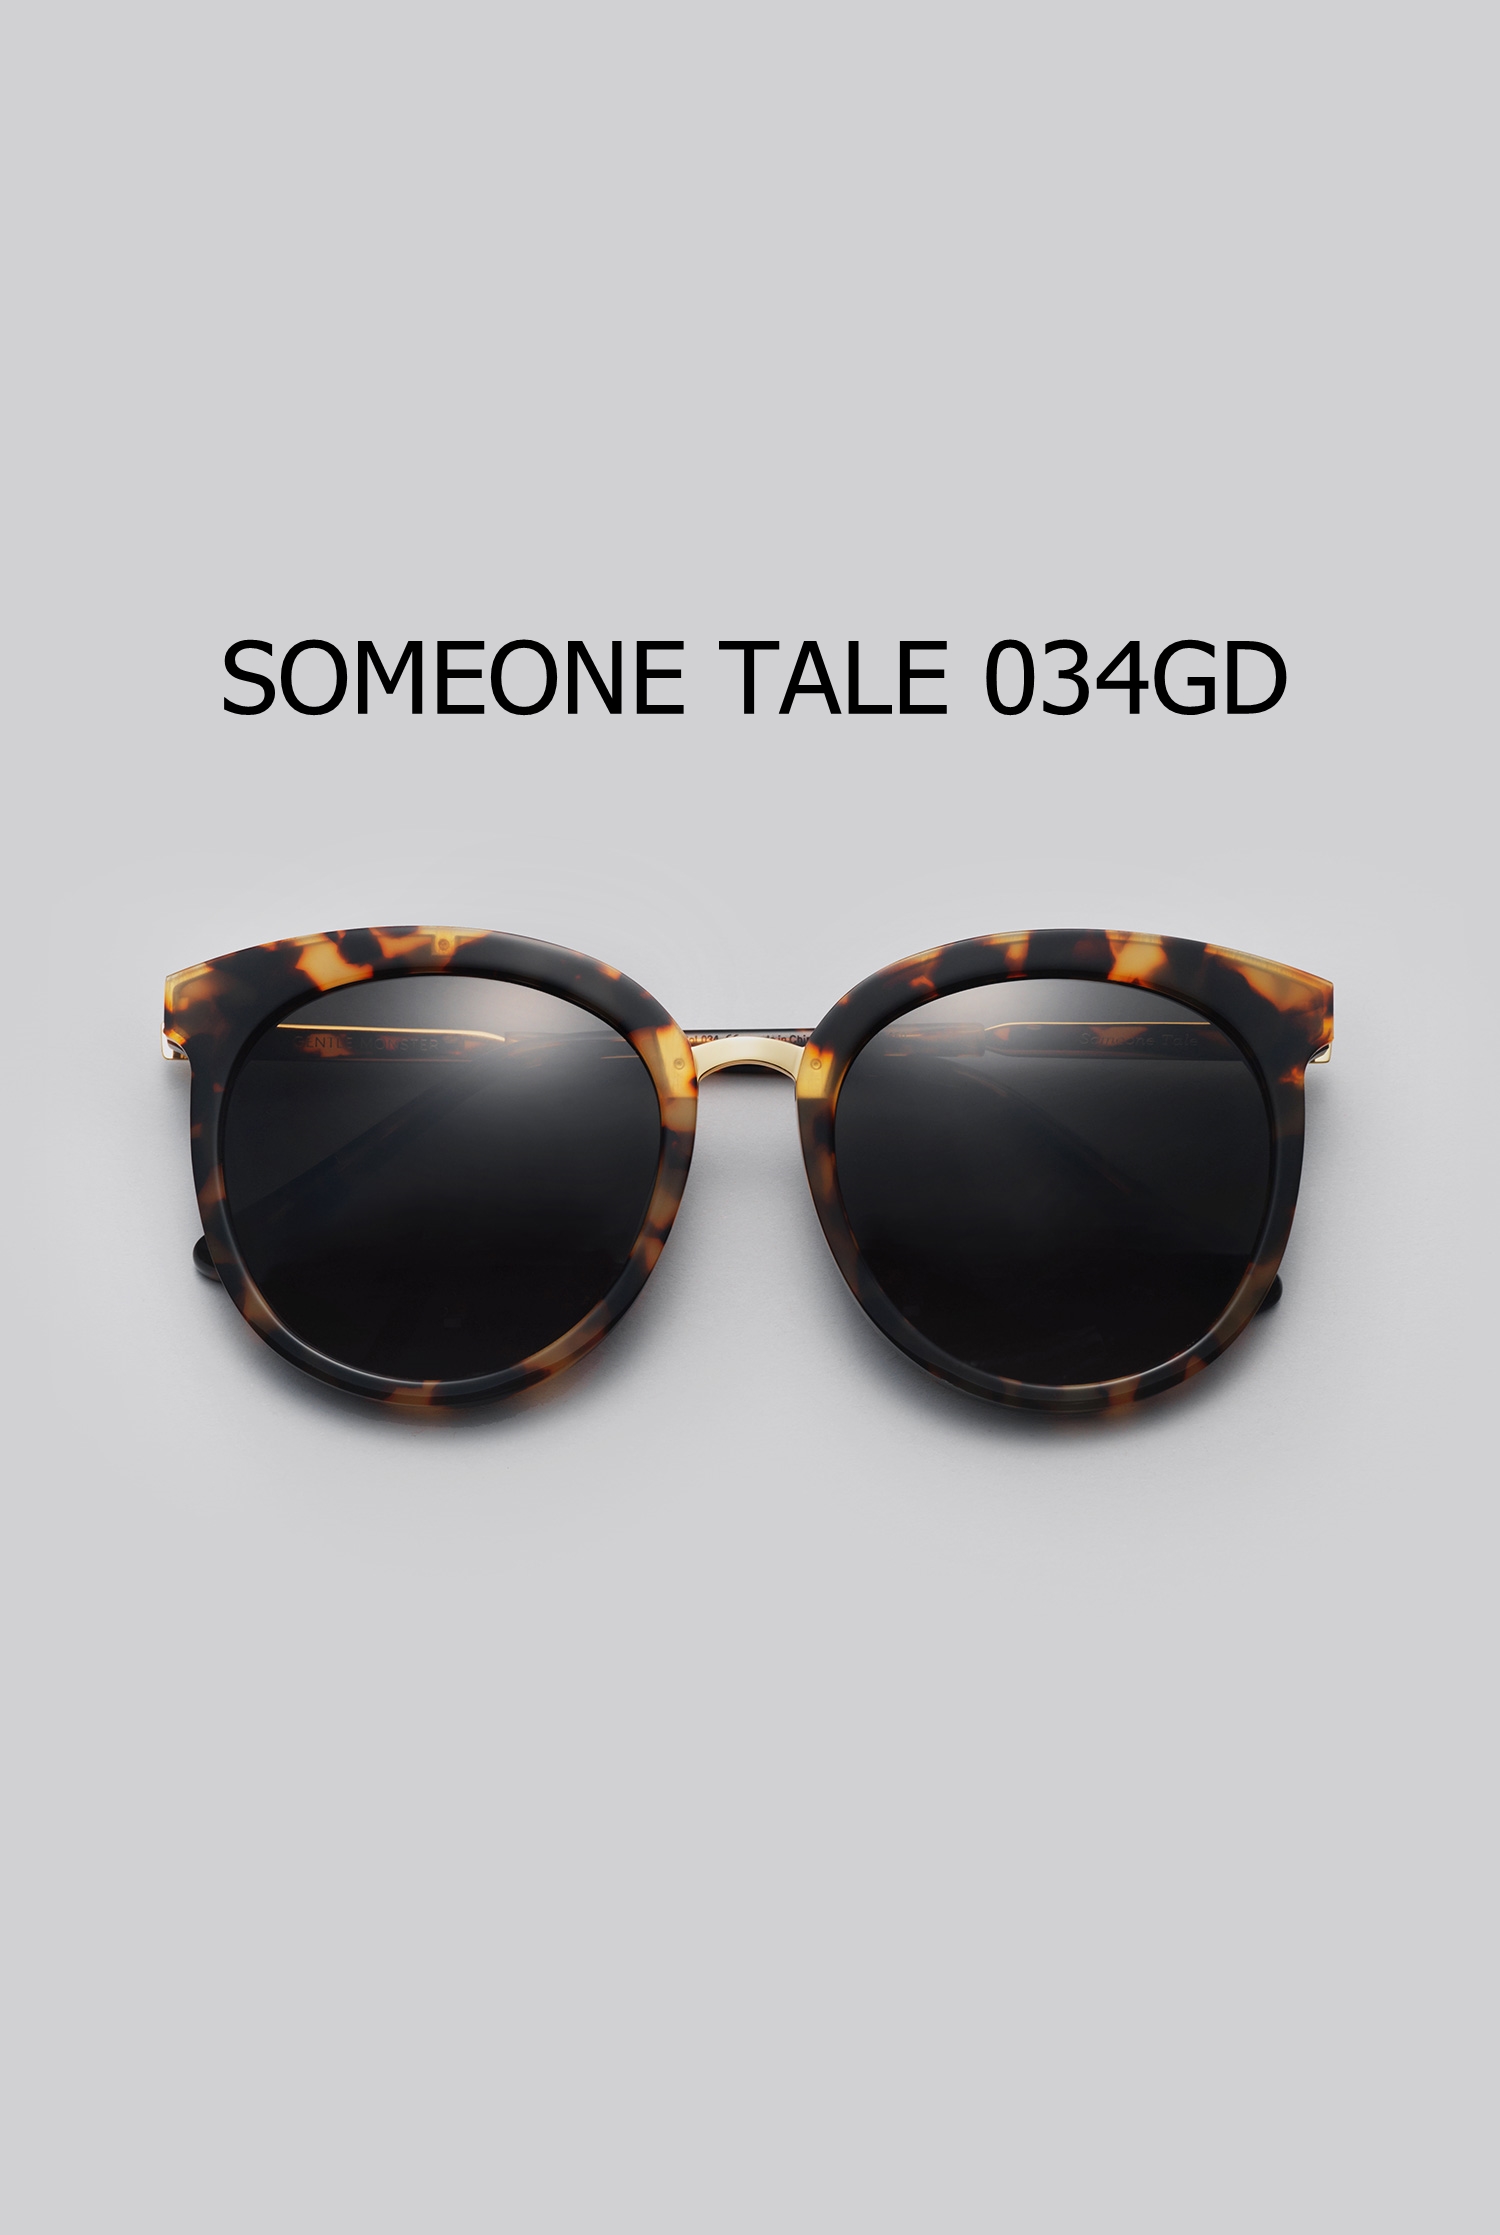 SOMEONE TALE 034GD